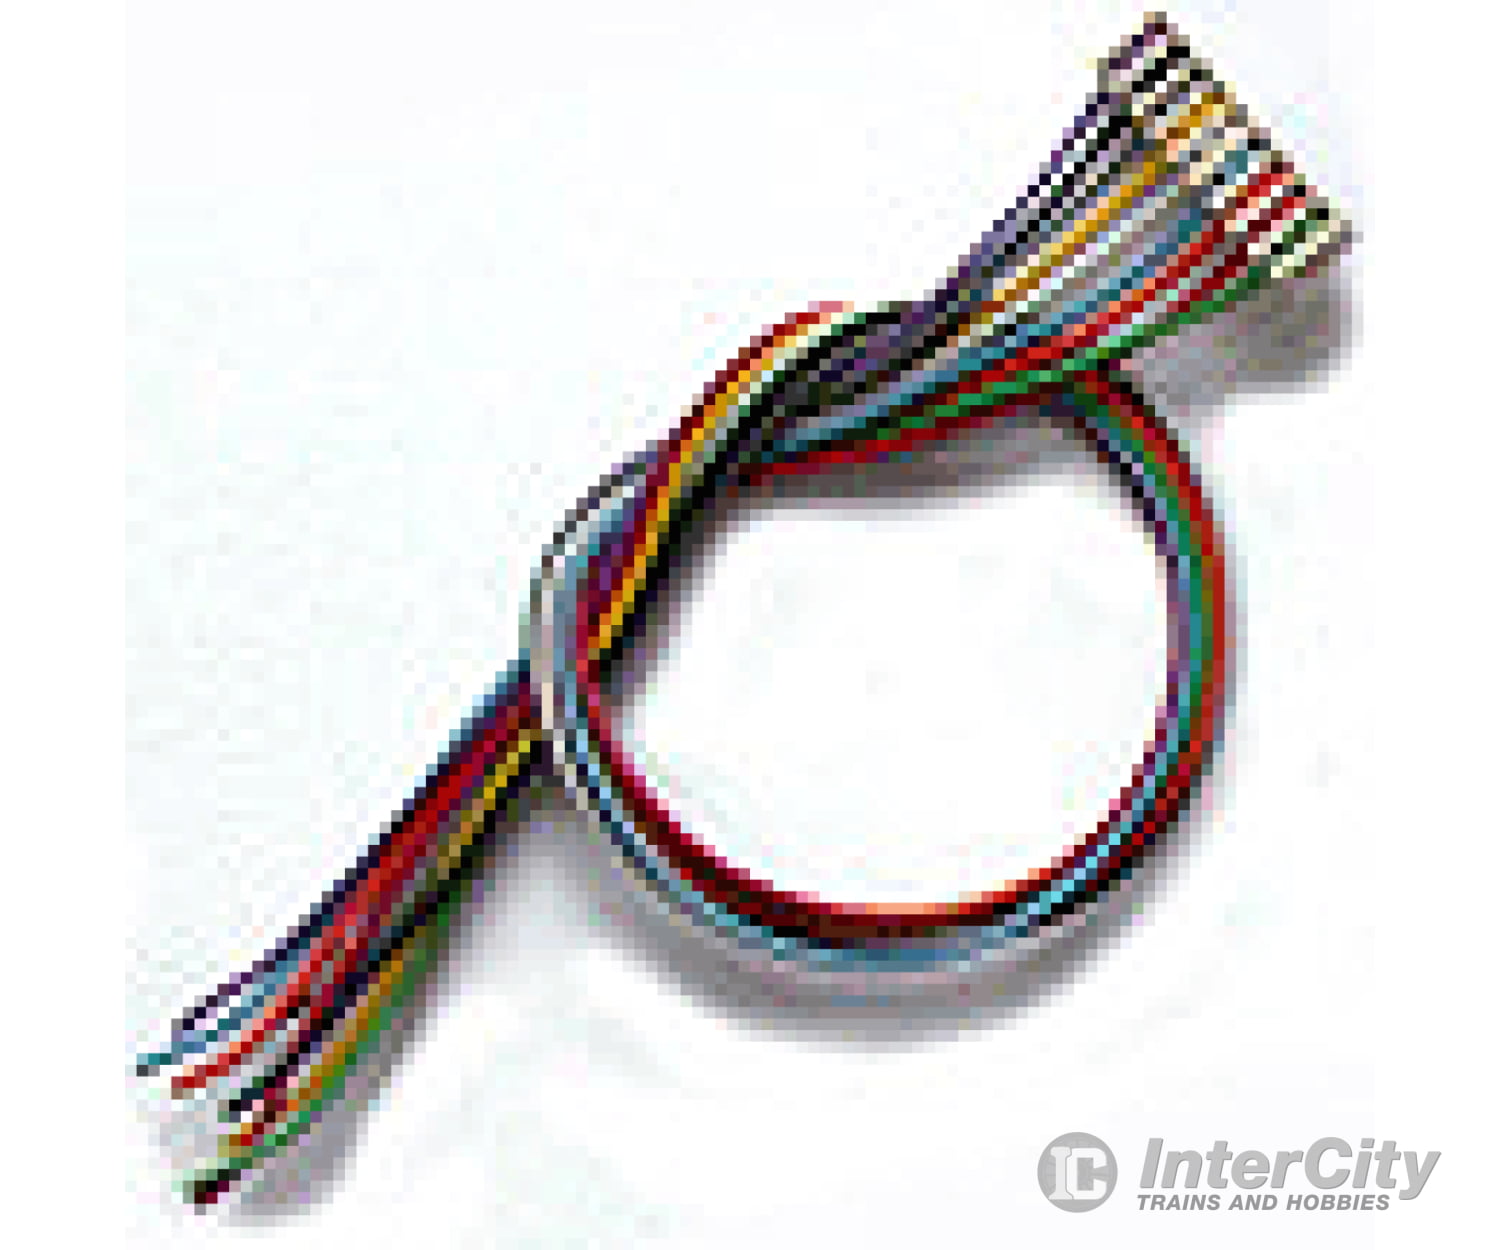 Train Control Systems 1033 Dcc Decoder Harness - - Wh 6’ For T Series No 8 - Pin Nmra Plug